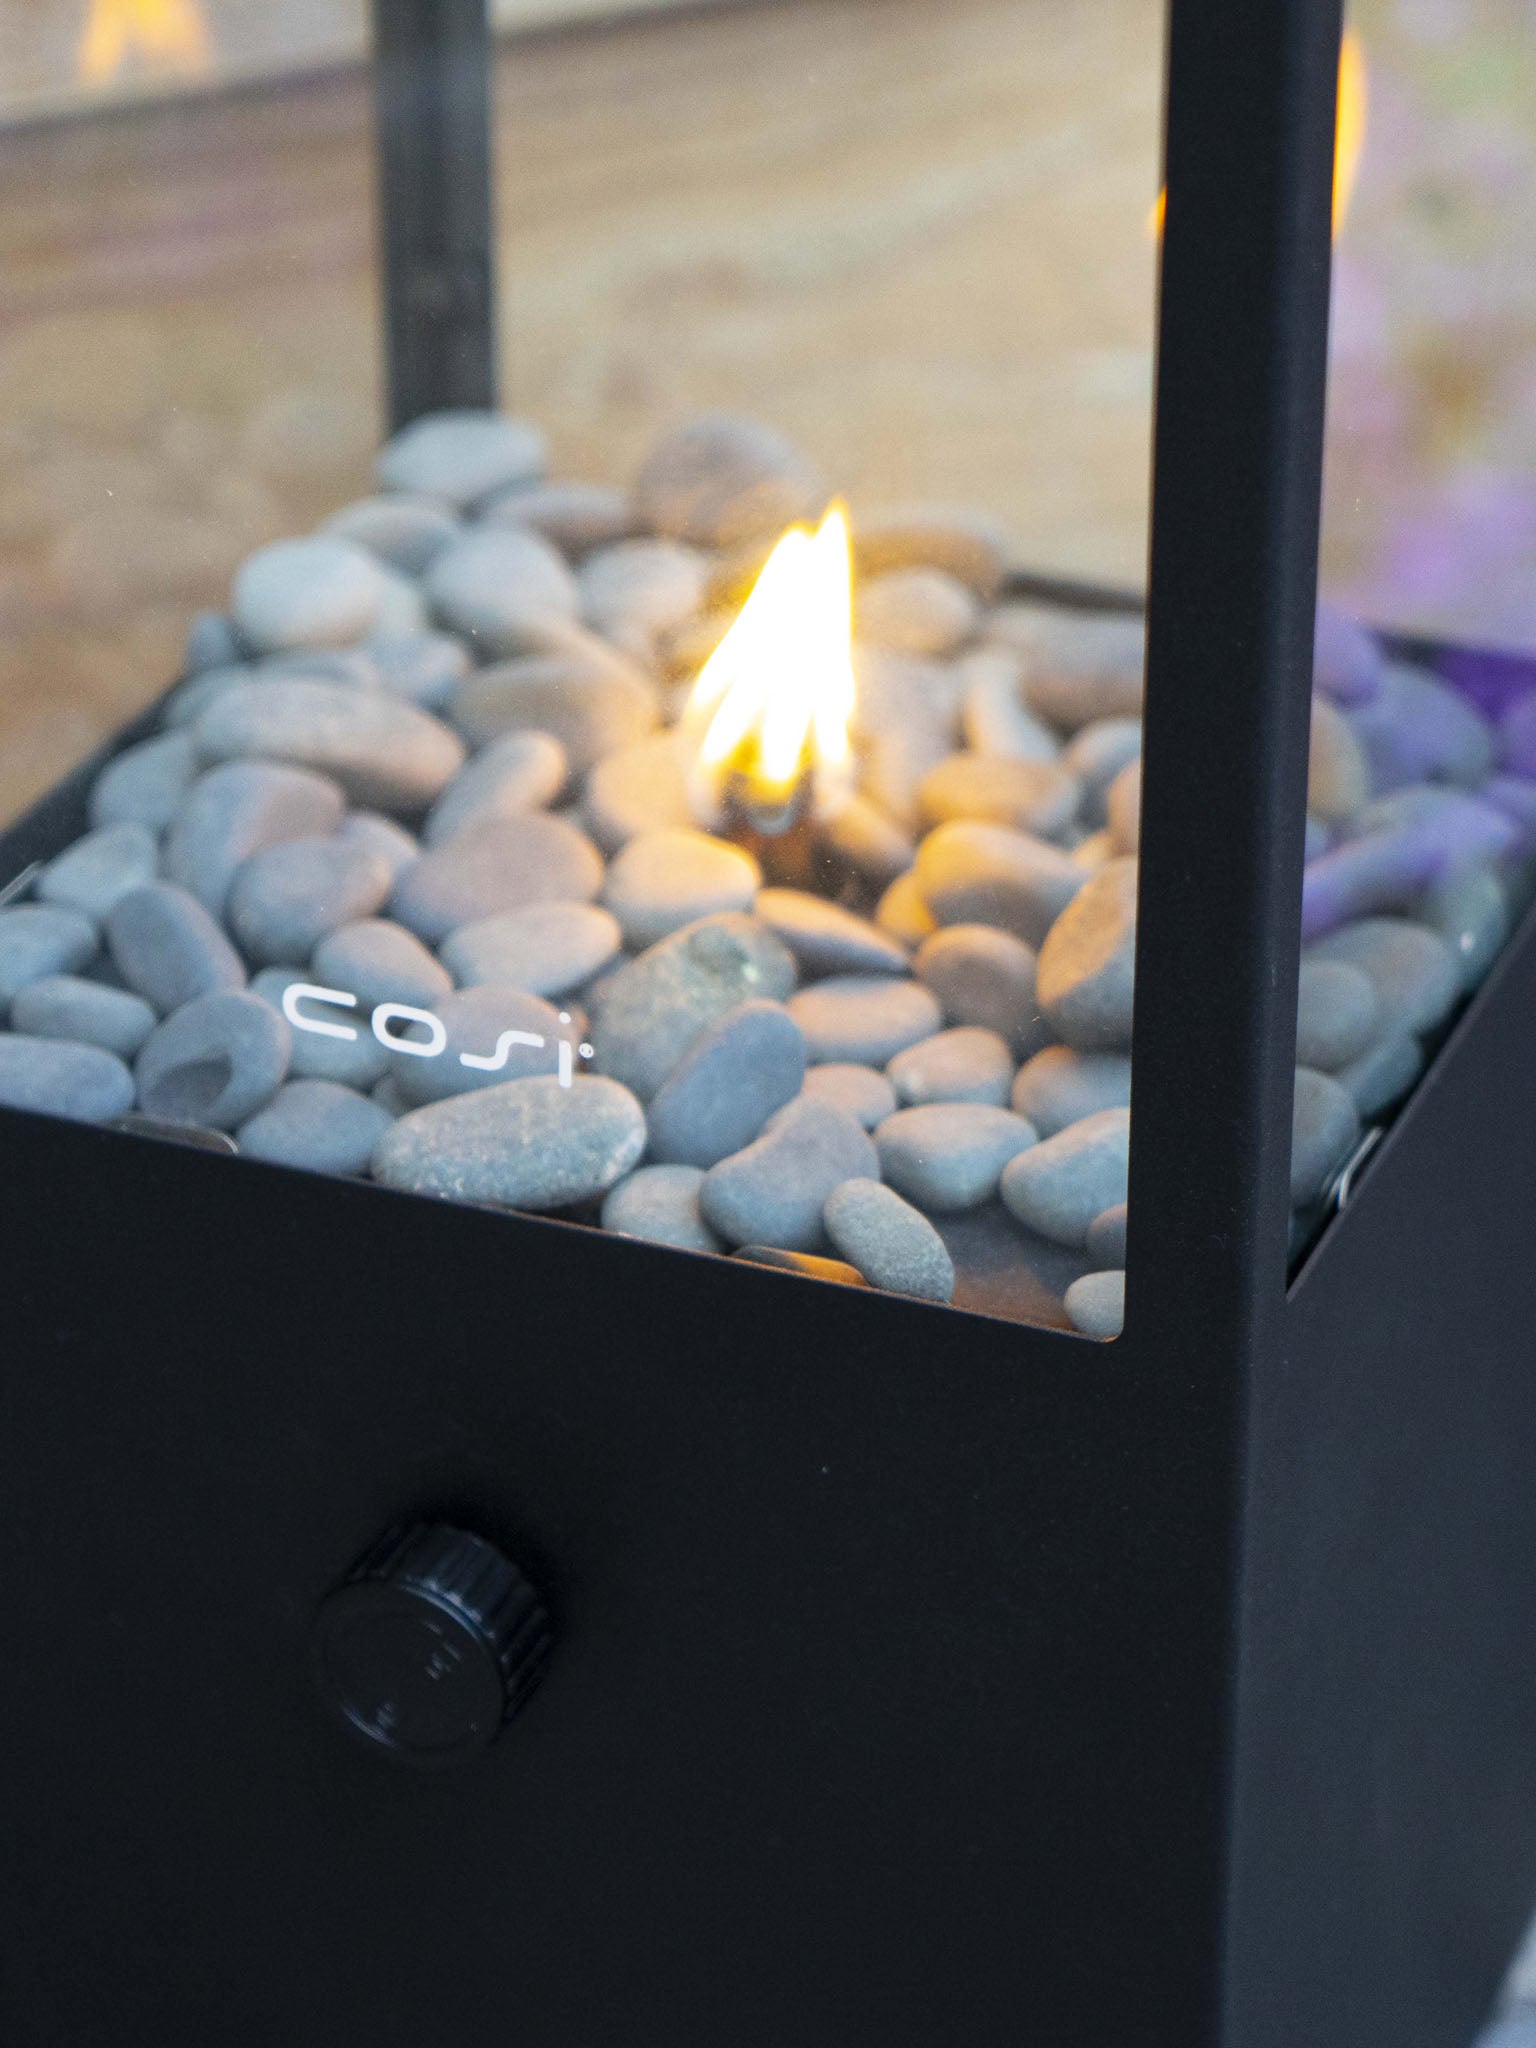 The High Black Fire Lantern is a high-quality lantern designed for outdoor use.